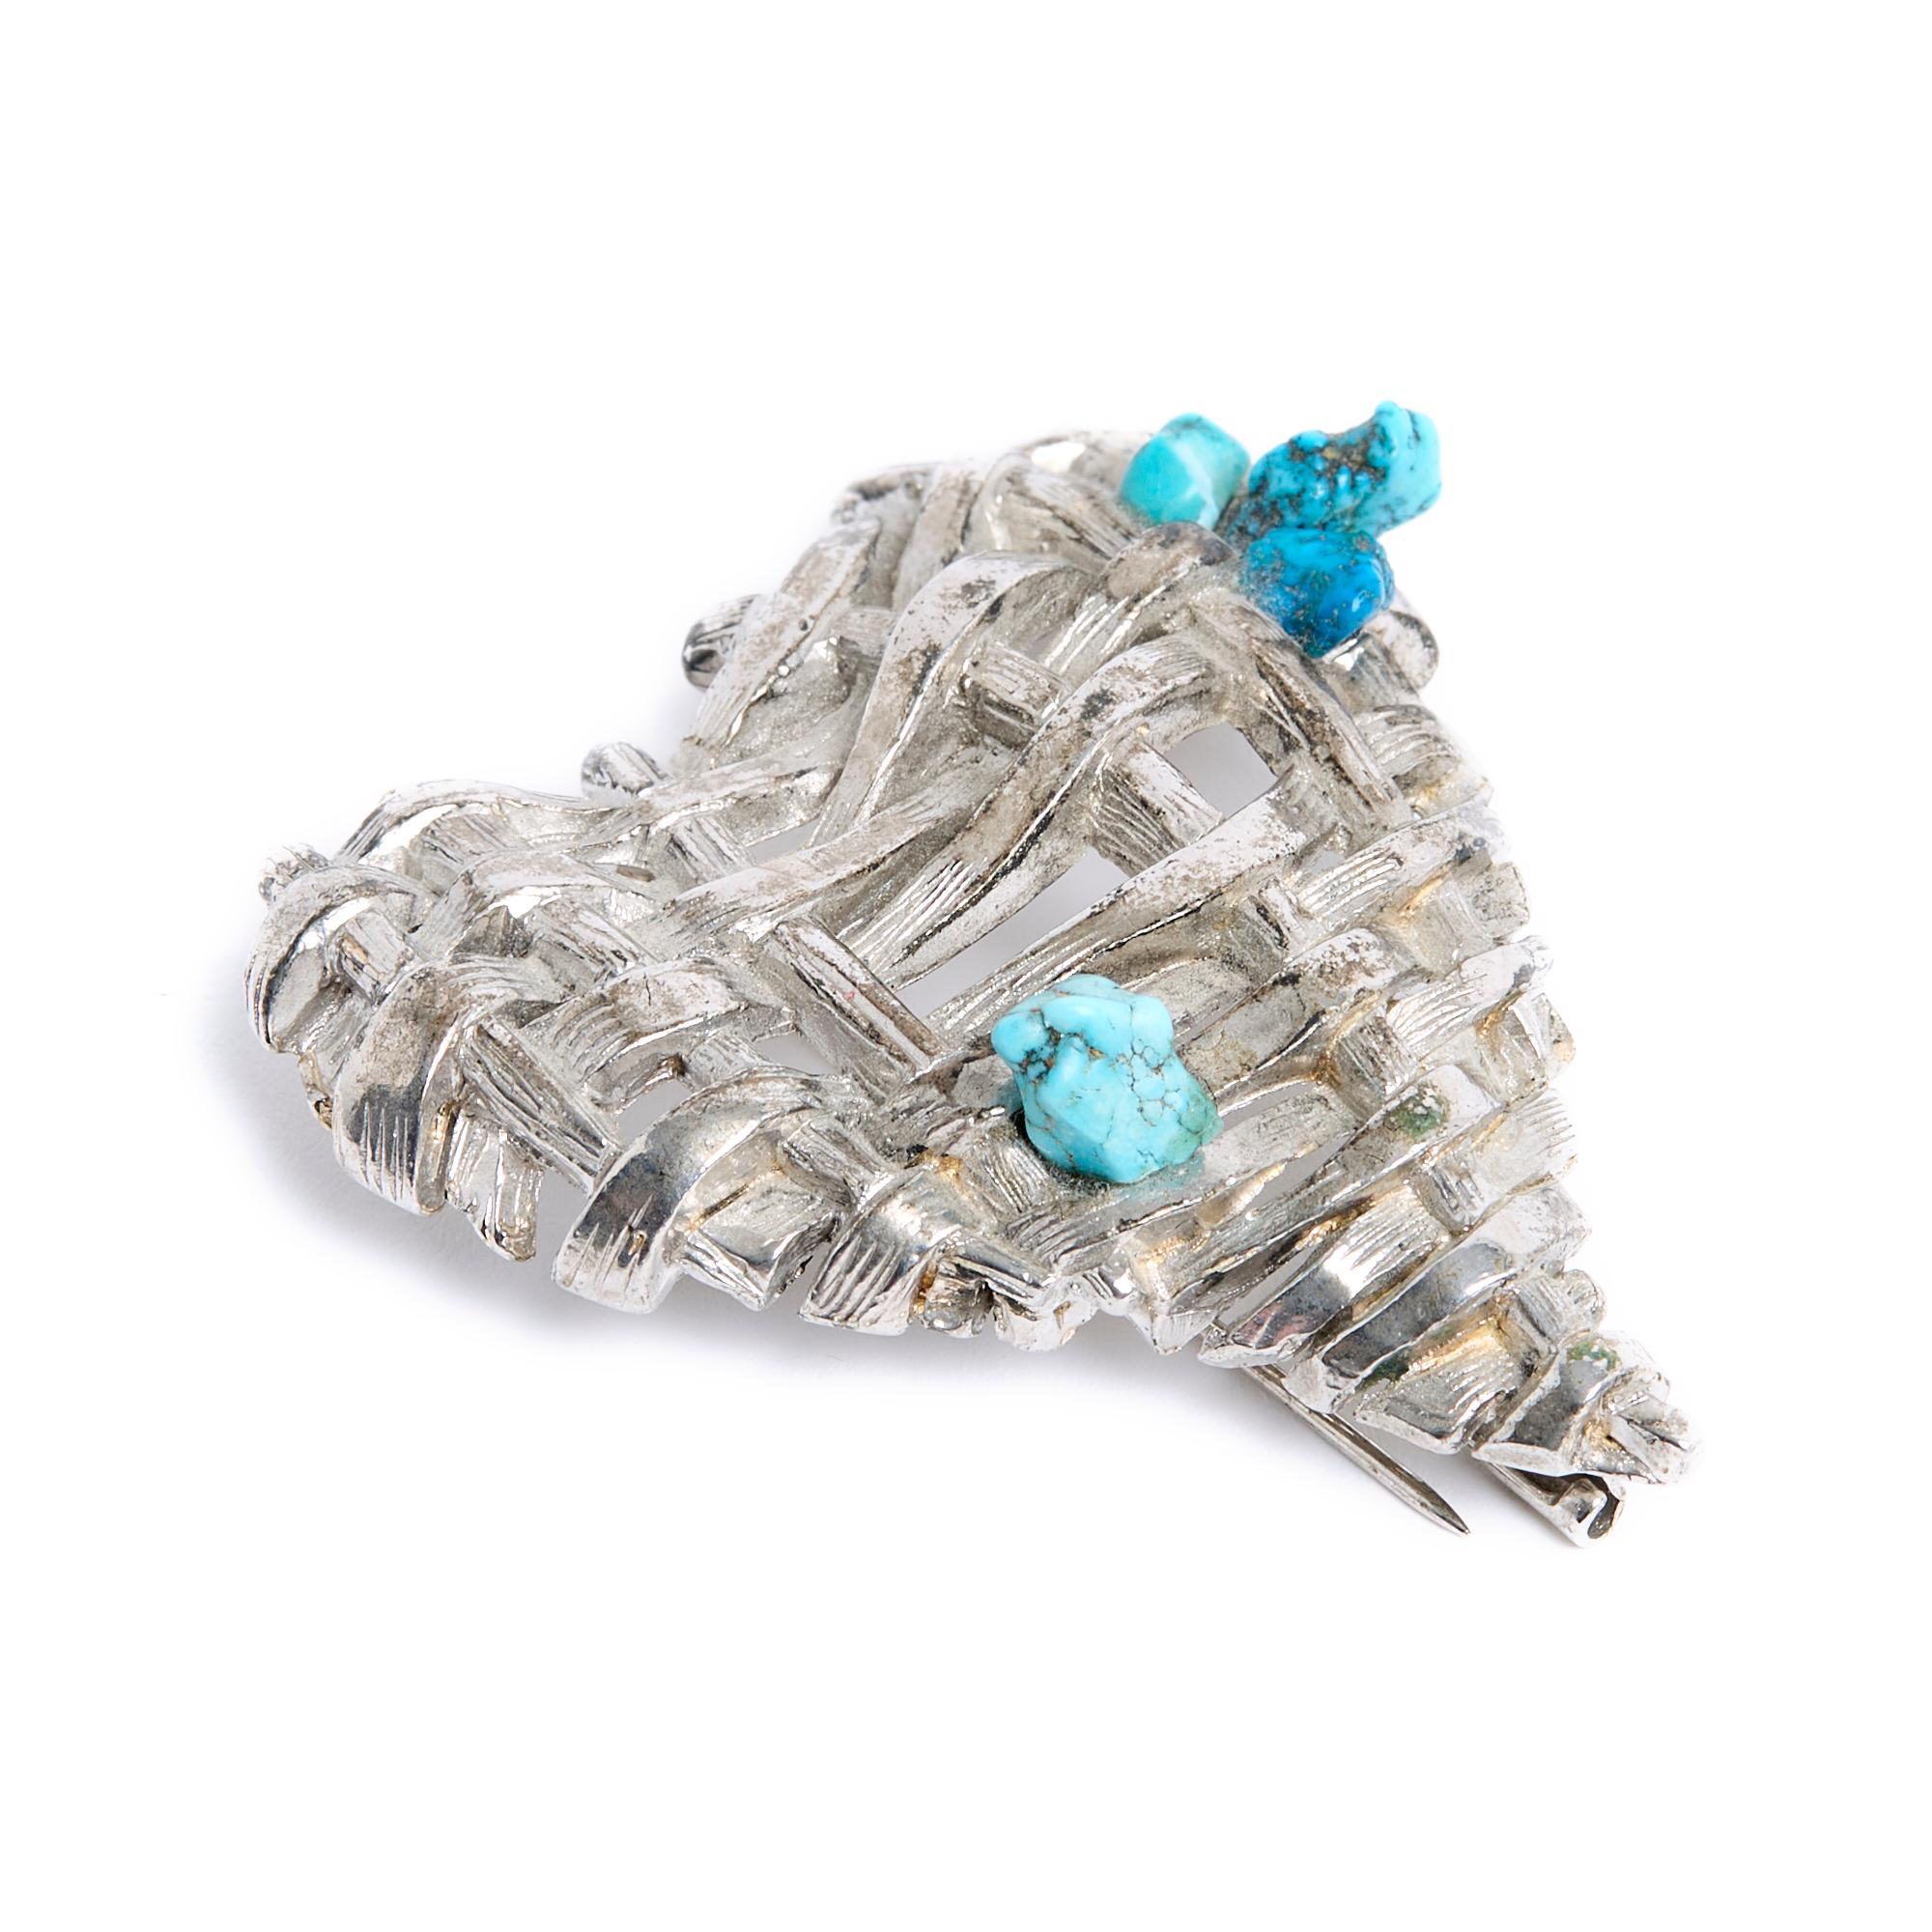 Christian Lacroix Haute Couture brooch in the shape of a large heart in slightly aged silver metal (a little darker than in the photo) braided and inlaid with nuggets of turquoise (or turquoise-style resin)... Dated 